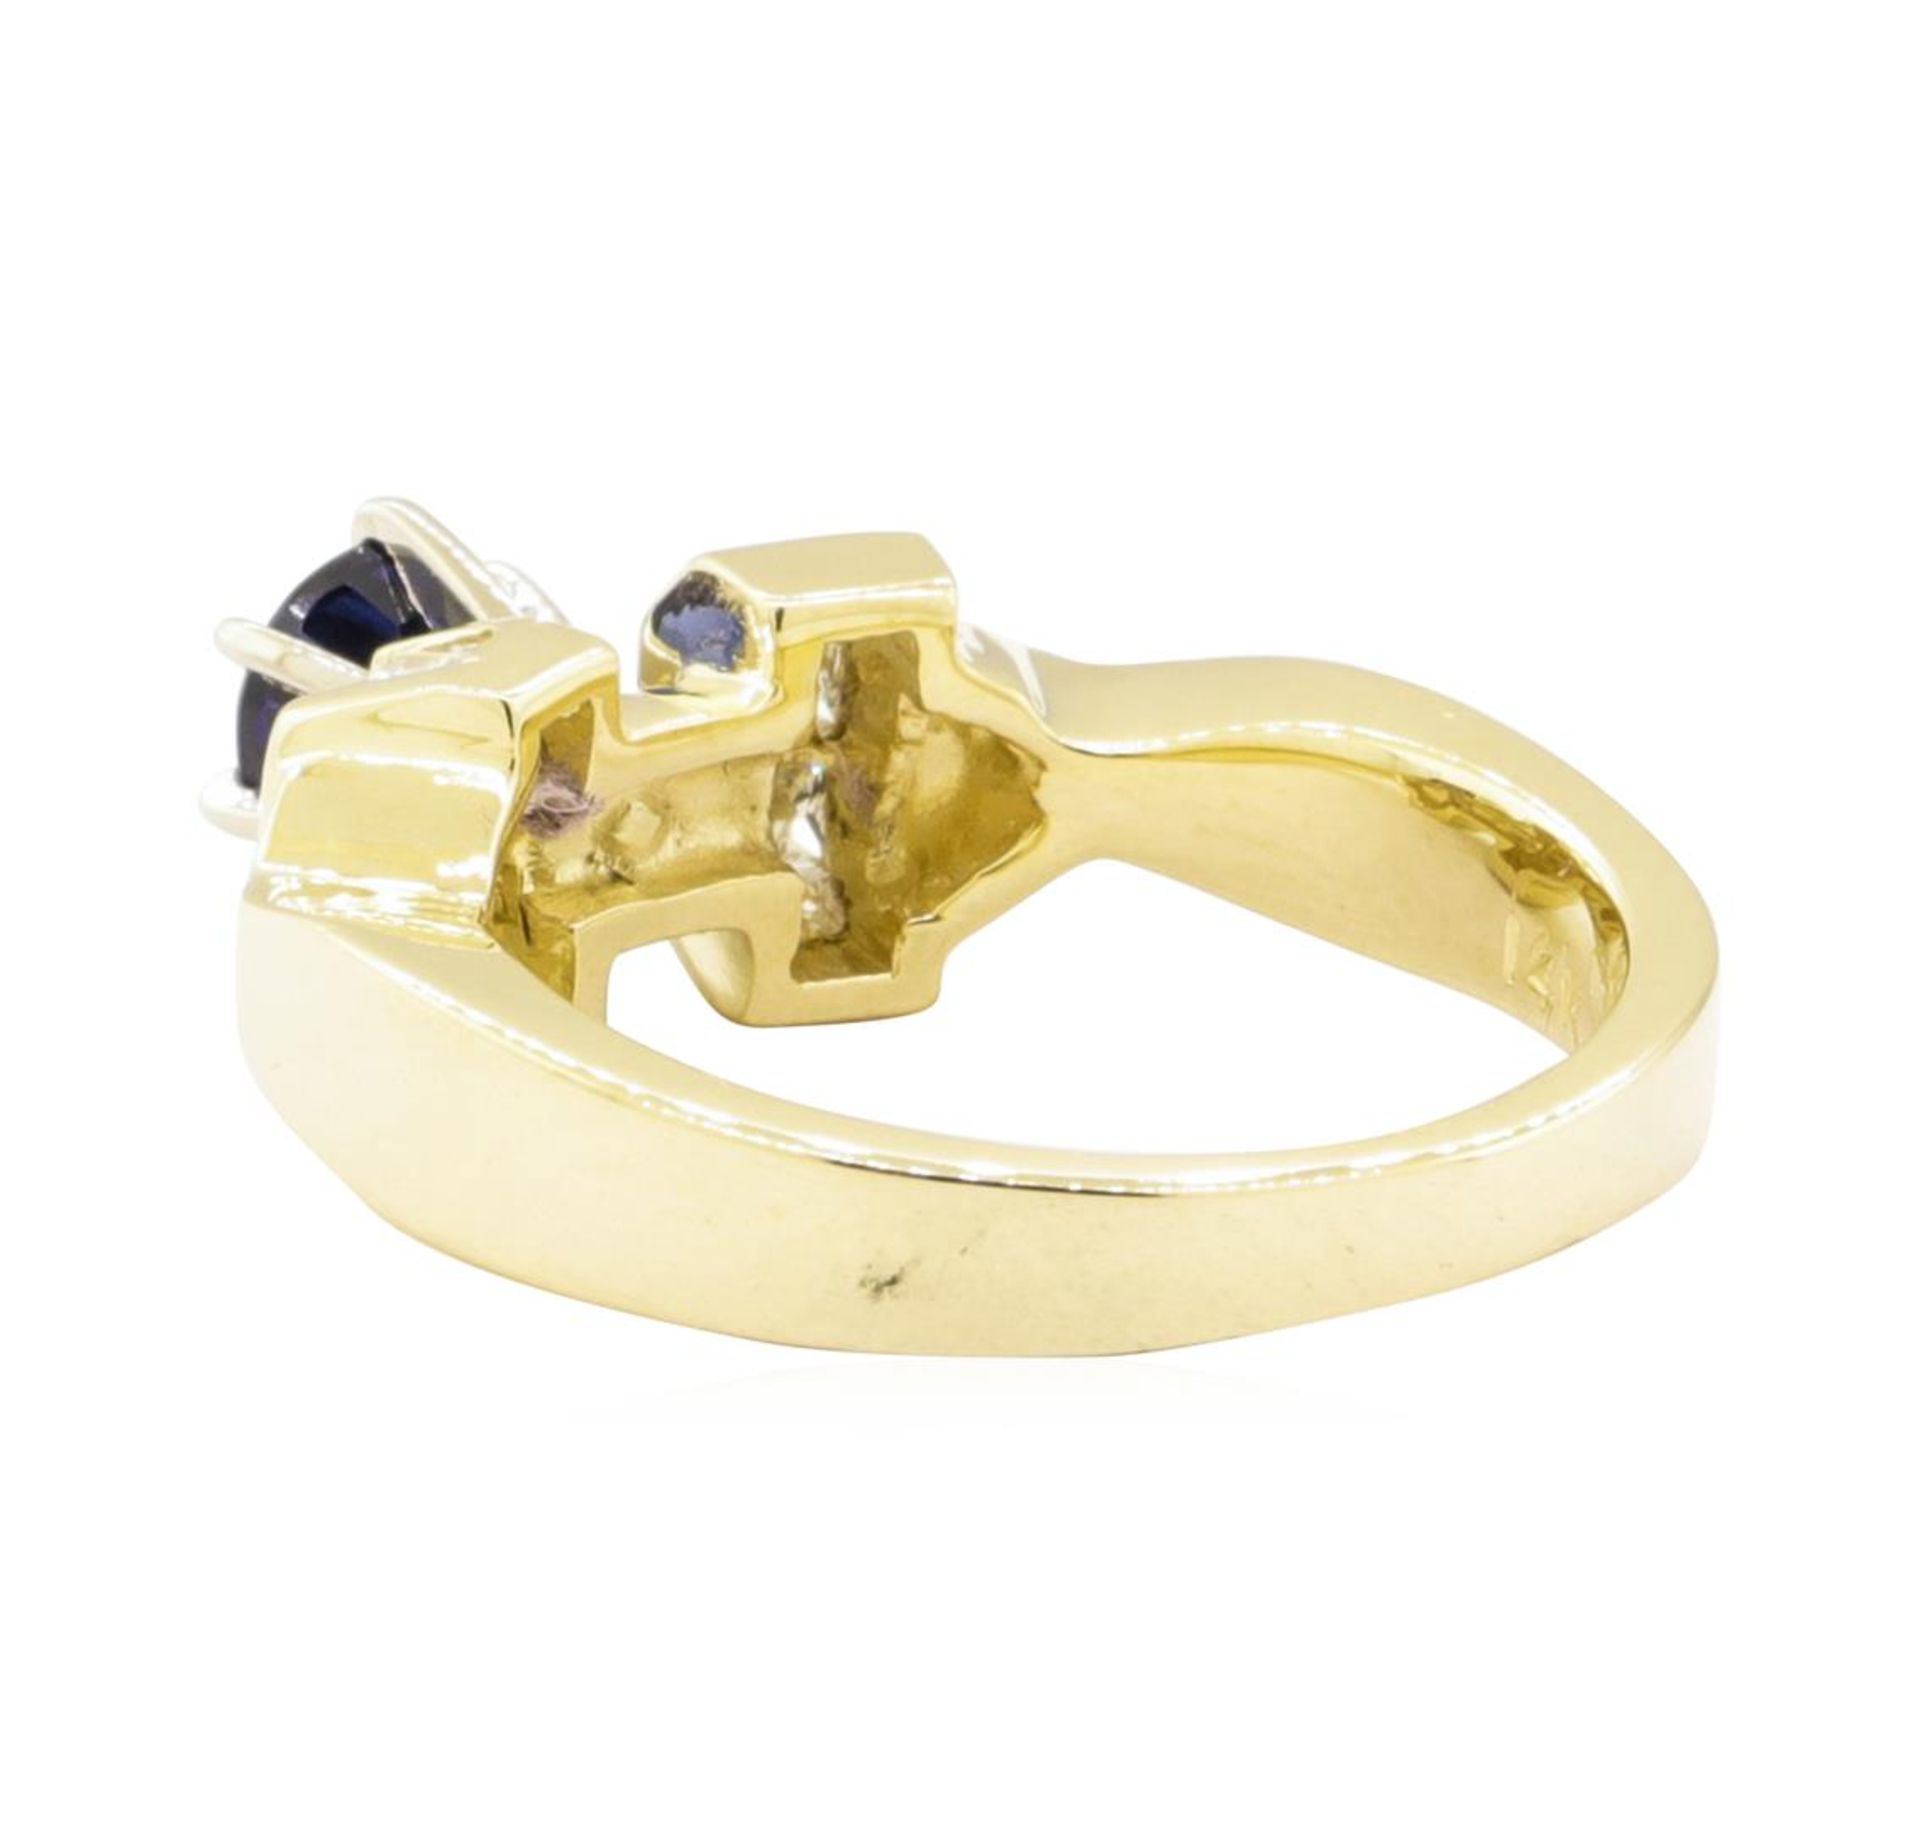 1.18 ctw Blue Sapphire and Diamond Ring - 14KT Yellow Gold - Image 3 of 4